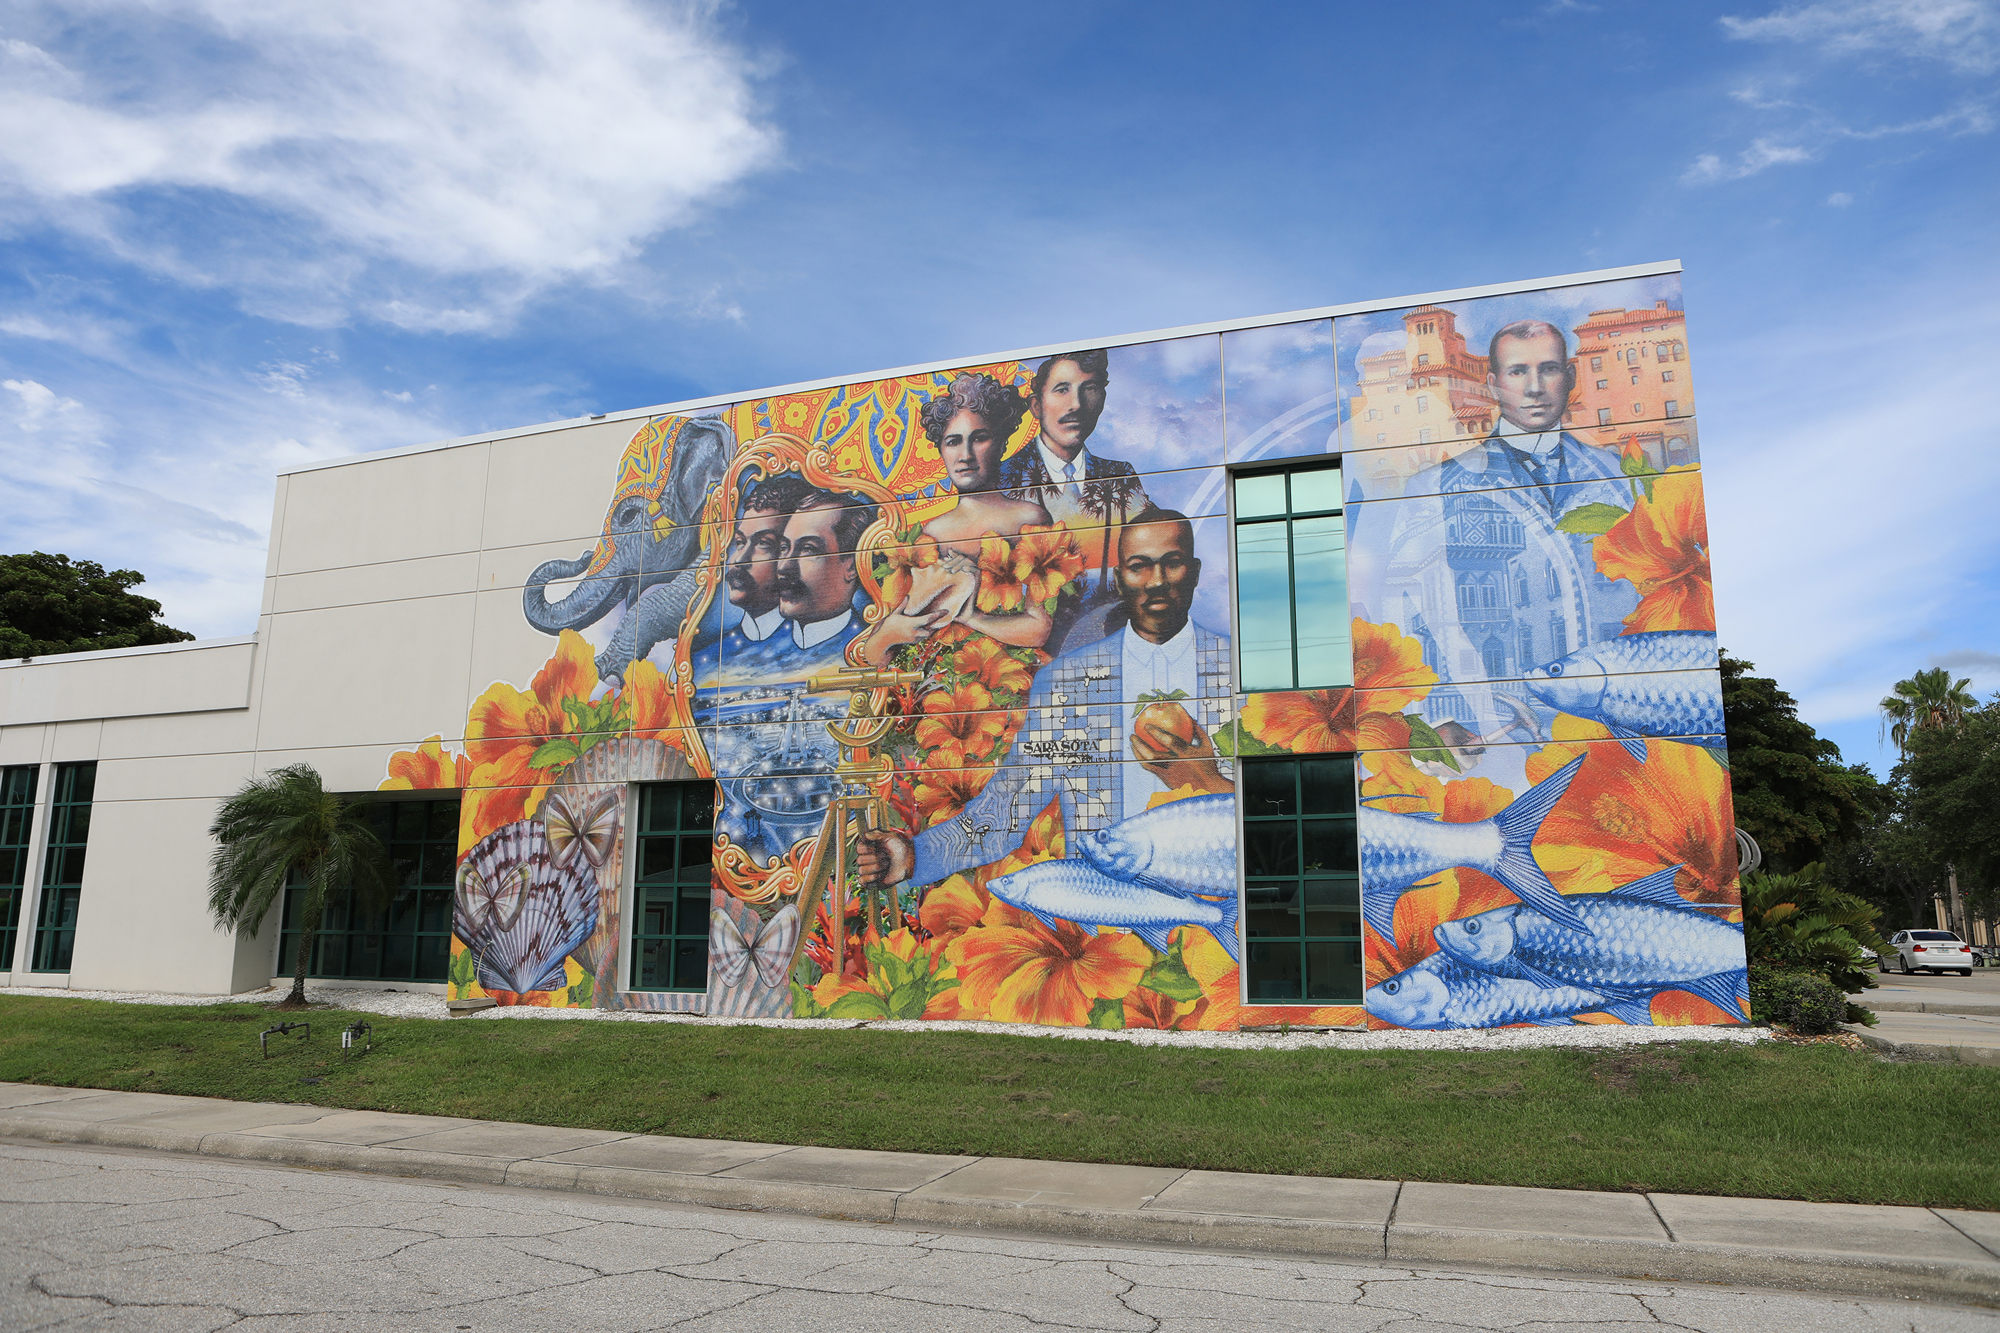 There are plenty of murals to find around town. (Photo by Harry Sayer)